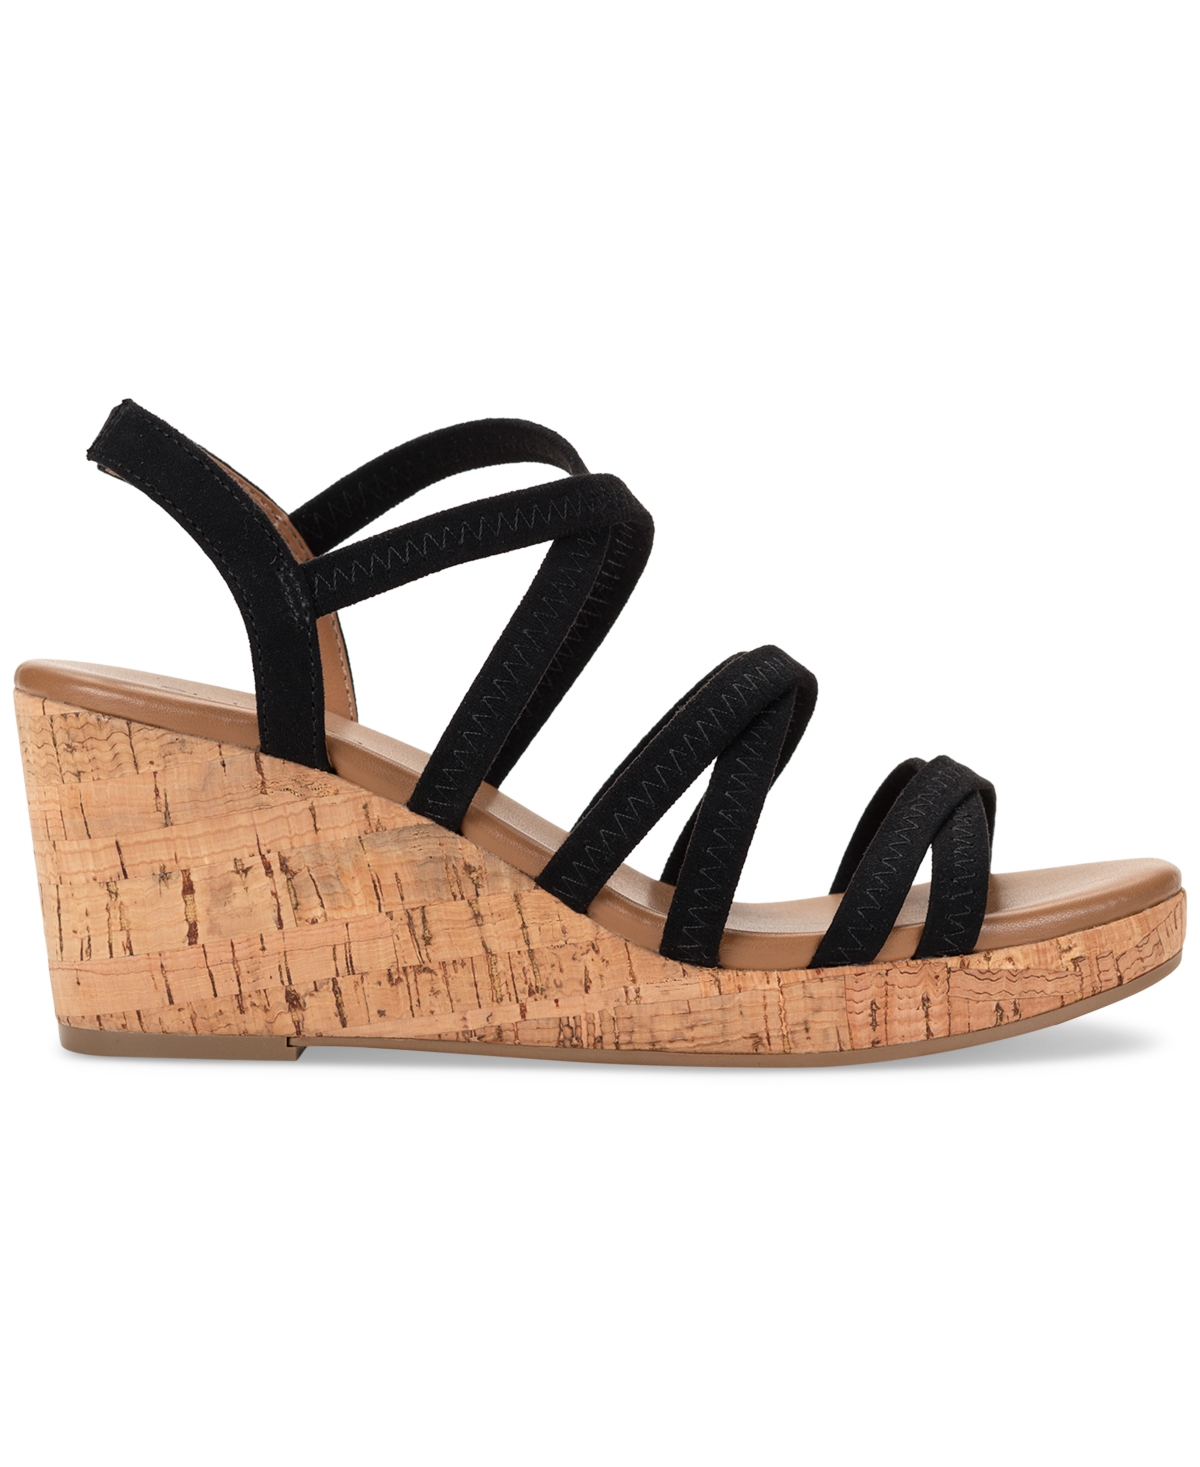 Shop Style & Co Women's Arloo Strappy Elastic Wedge Sandals, Created For Macy's In Daffodil